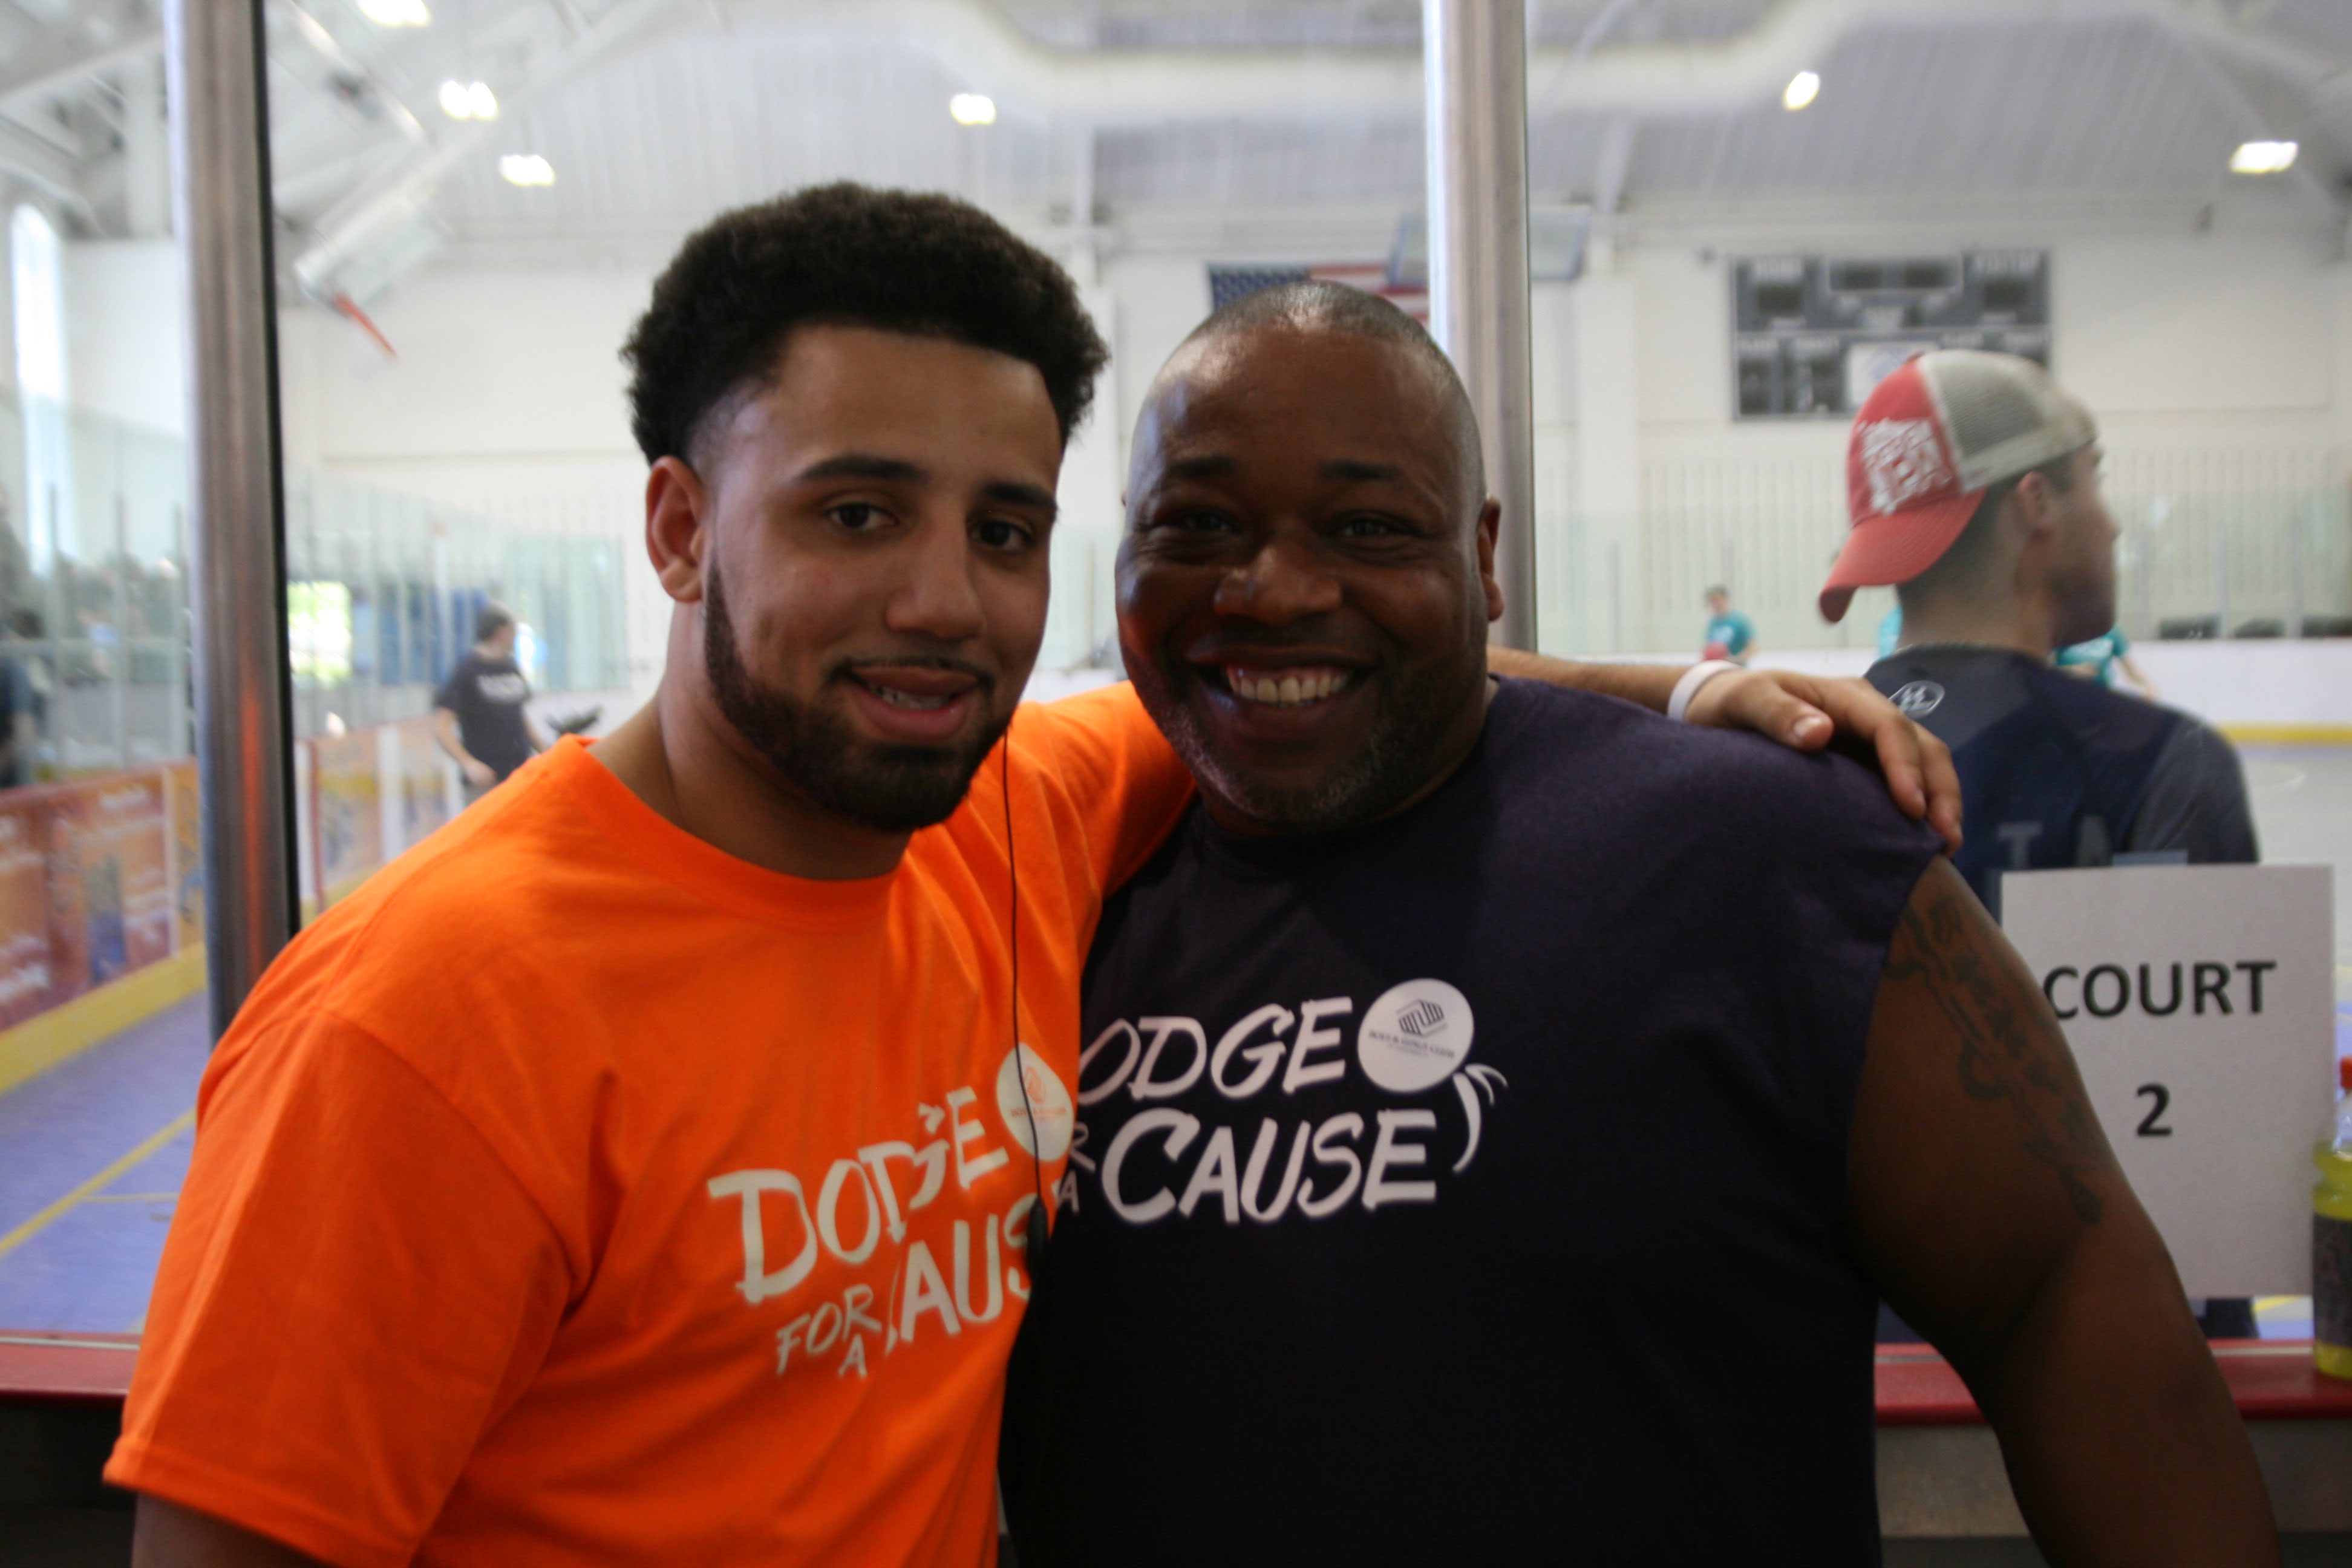 Camryn Ferrara and Reggie Spears at the 3rd Annual “Dodge for a Cause” charity dodgeball tournament at the Boys & Girls Club of Greenwich.